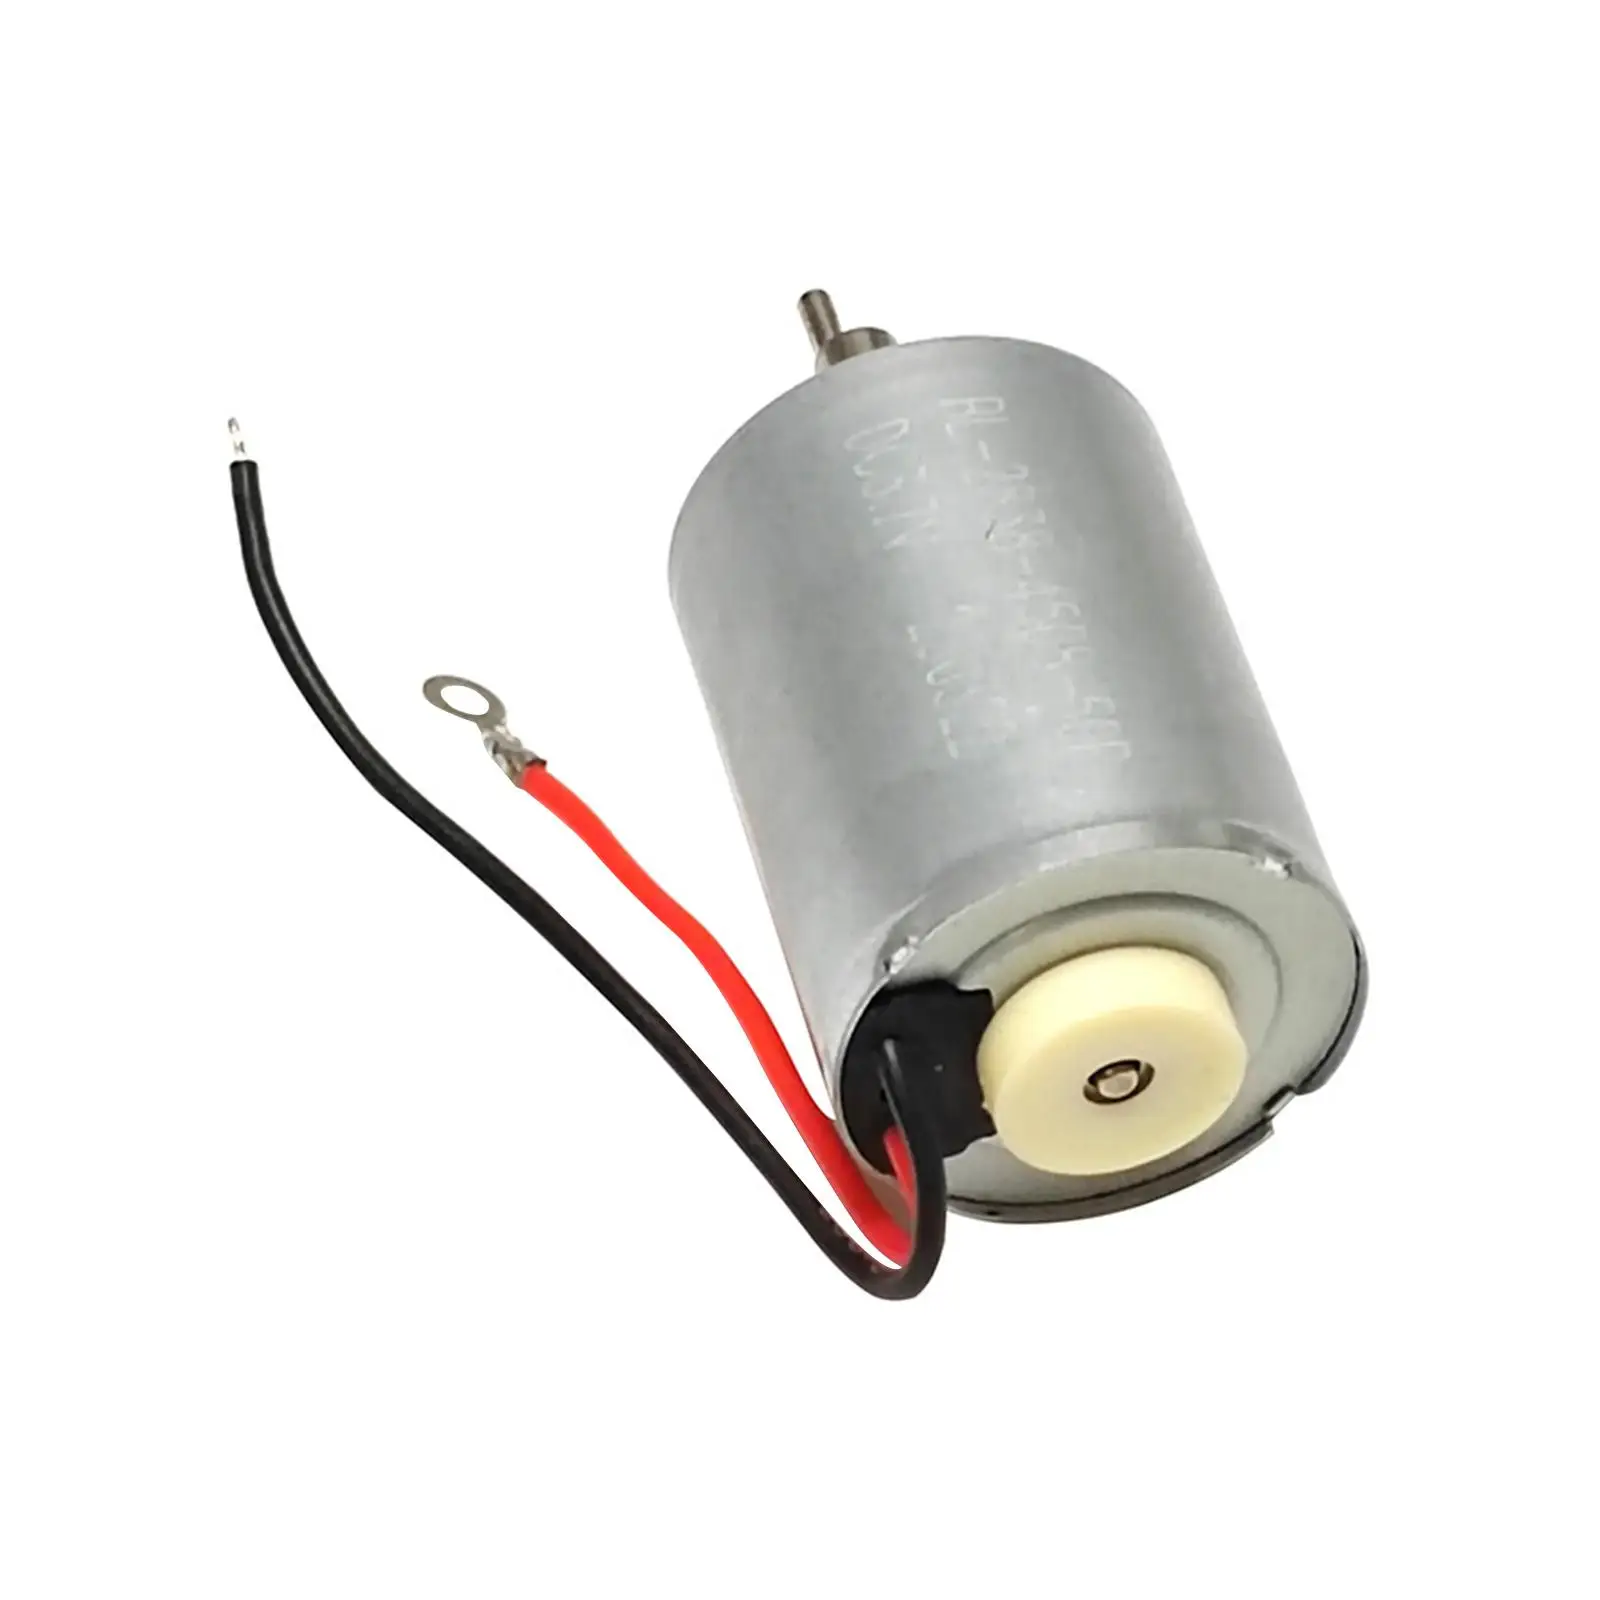 Motor for Hair Clippers Parts 7000 PRM Professional Replacement Brushless Motor Hair Trimmer Motor for 2240 2241 8504 8591 8148